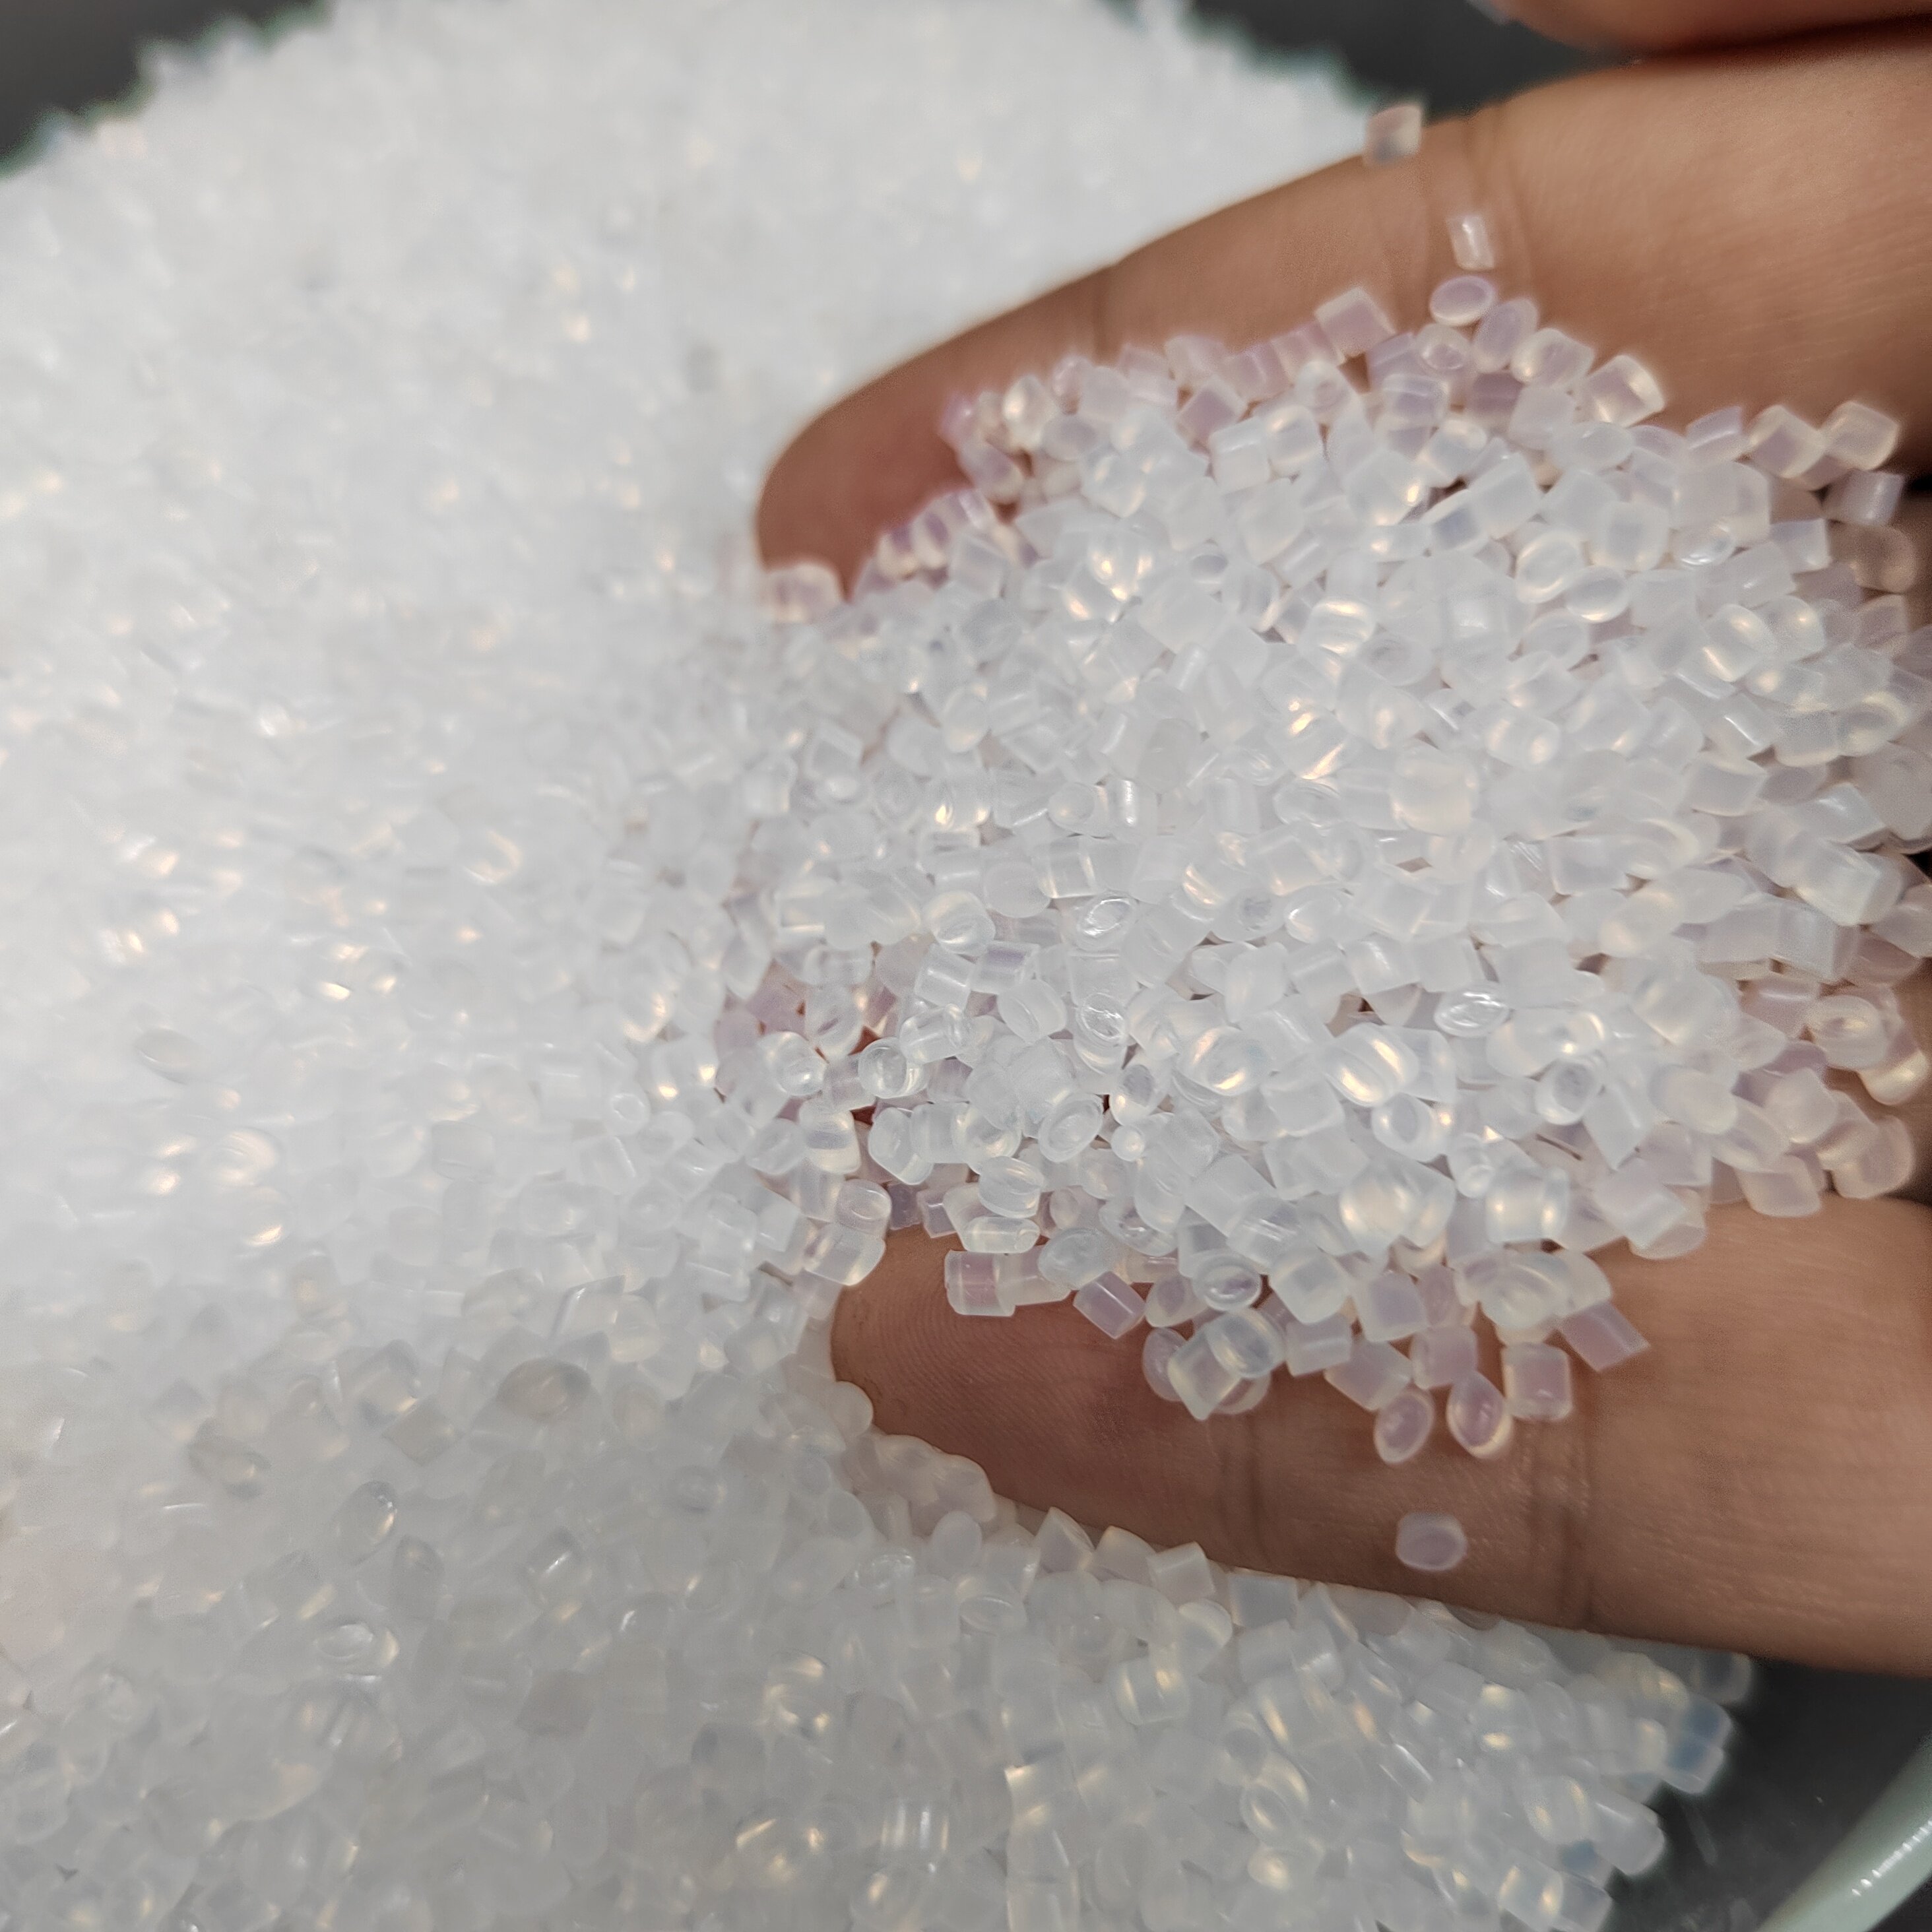 What are plastic granules and what are they used for?